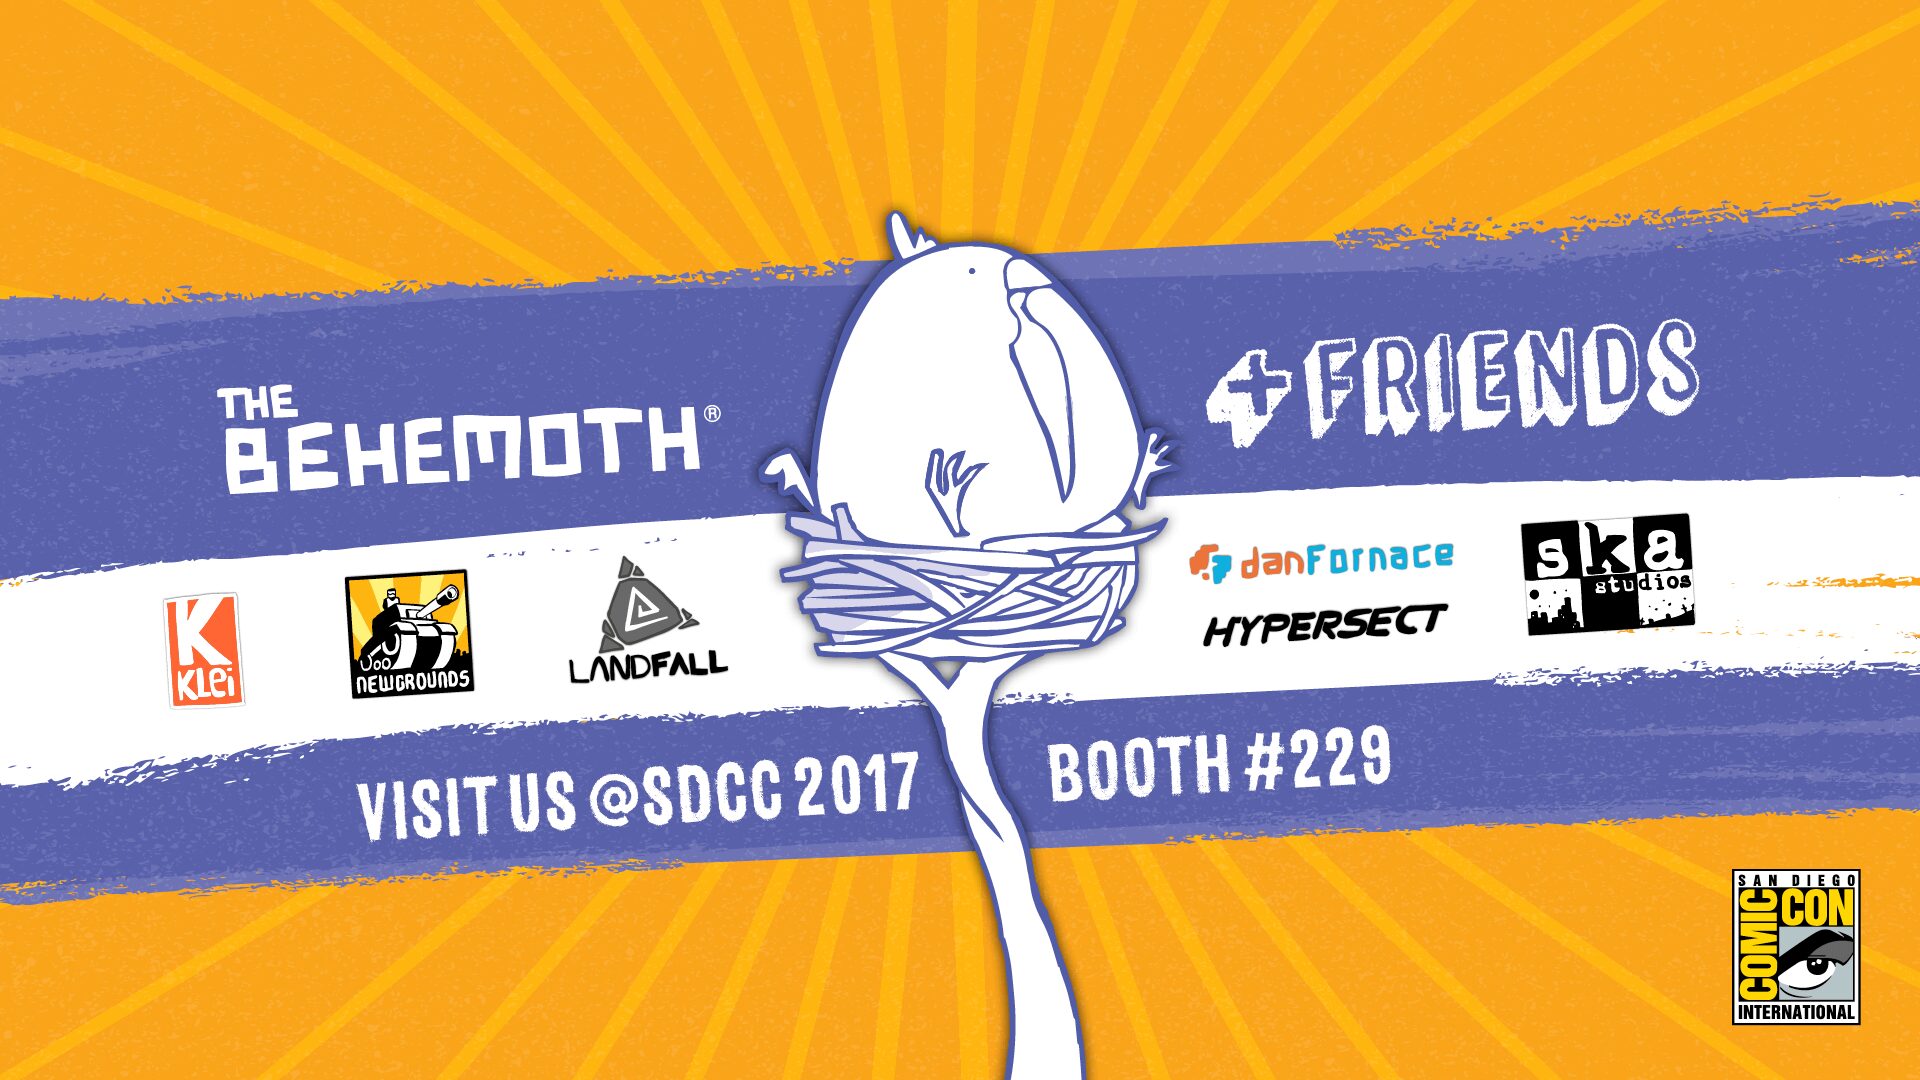 The first ever “The Behemoth + Friends” booth at San Diego Comic Con International